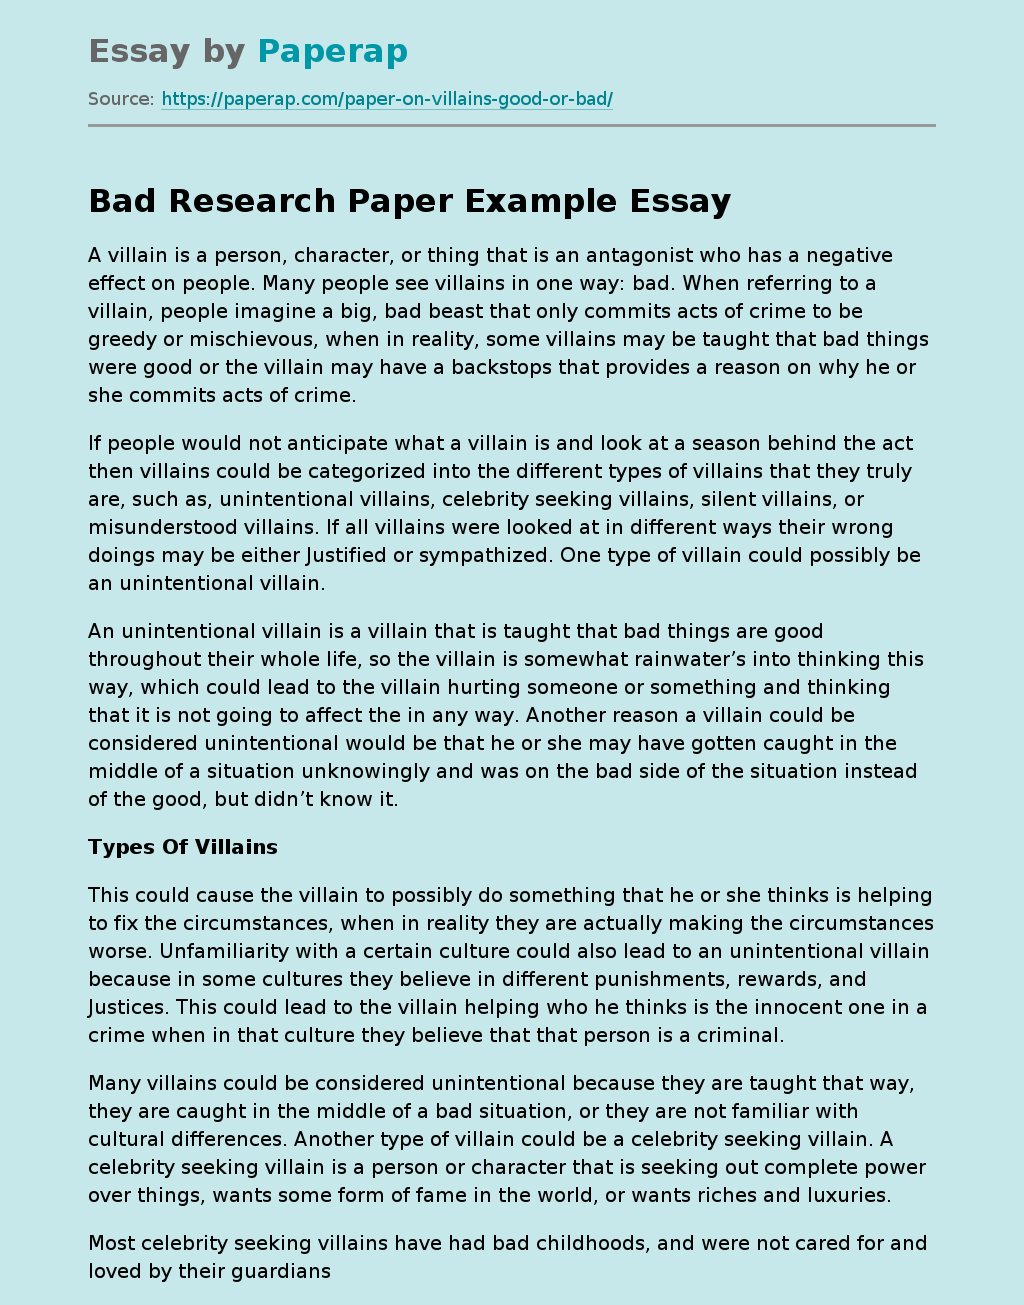 Bad Research Paper Example